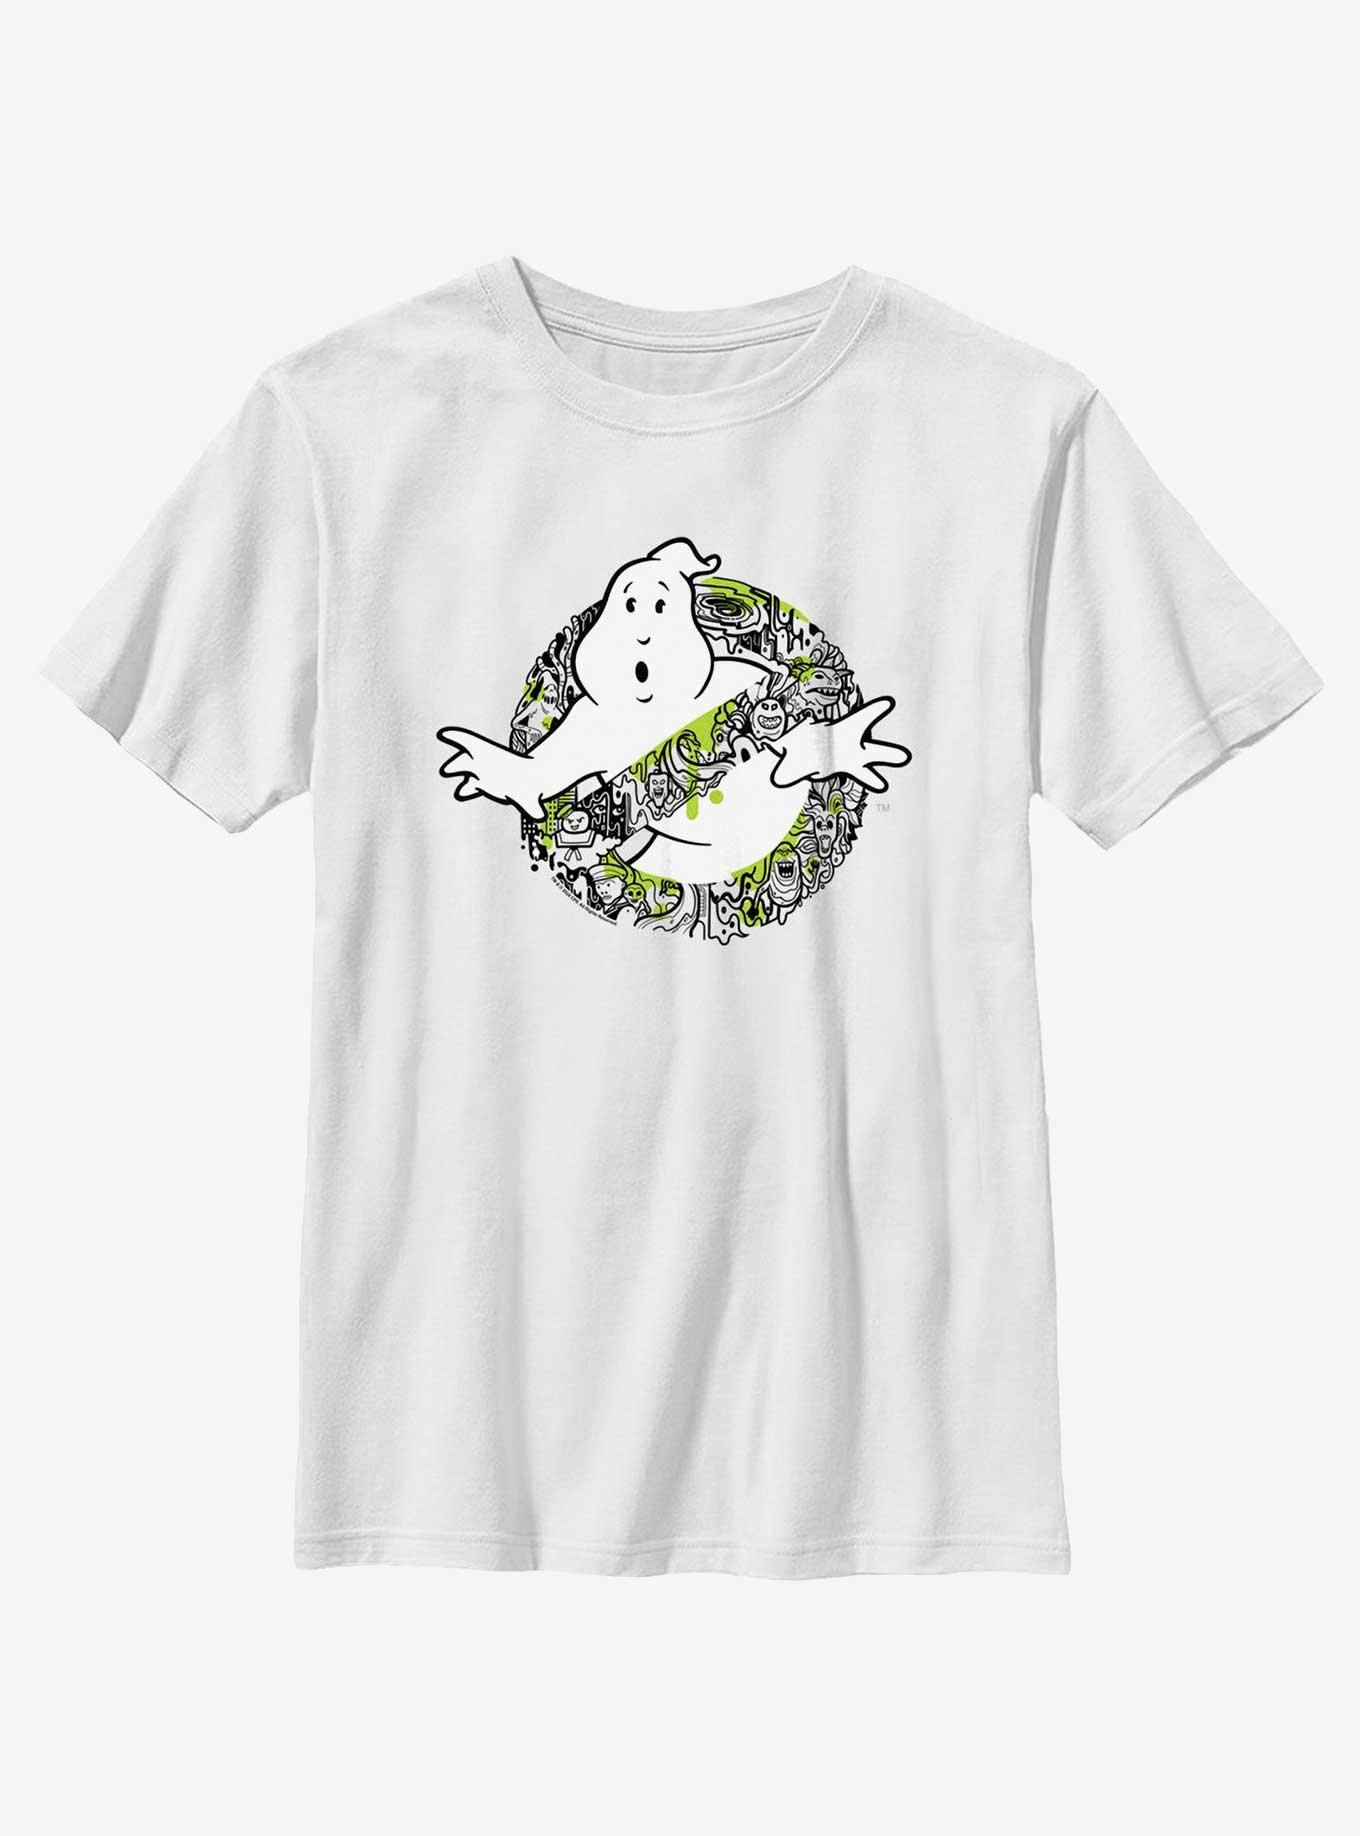 Ghostbusters: Frozen Empire Busting Ghosts Youth T-Shirt, WHITE, hi-res